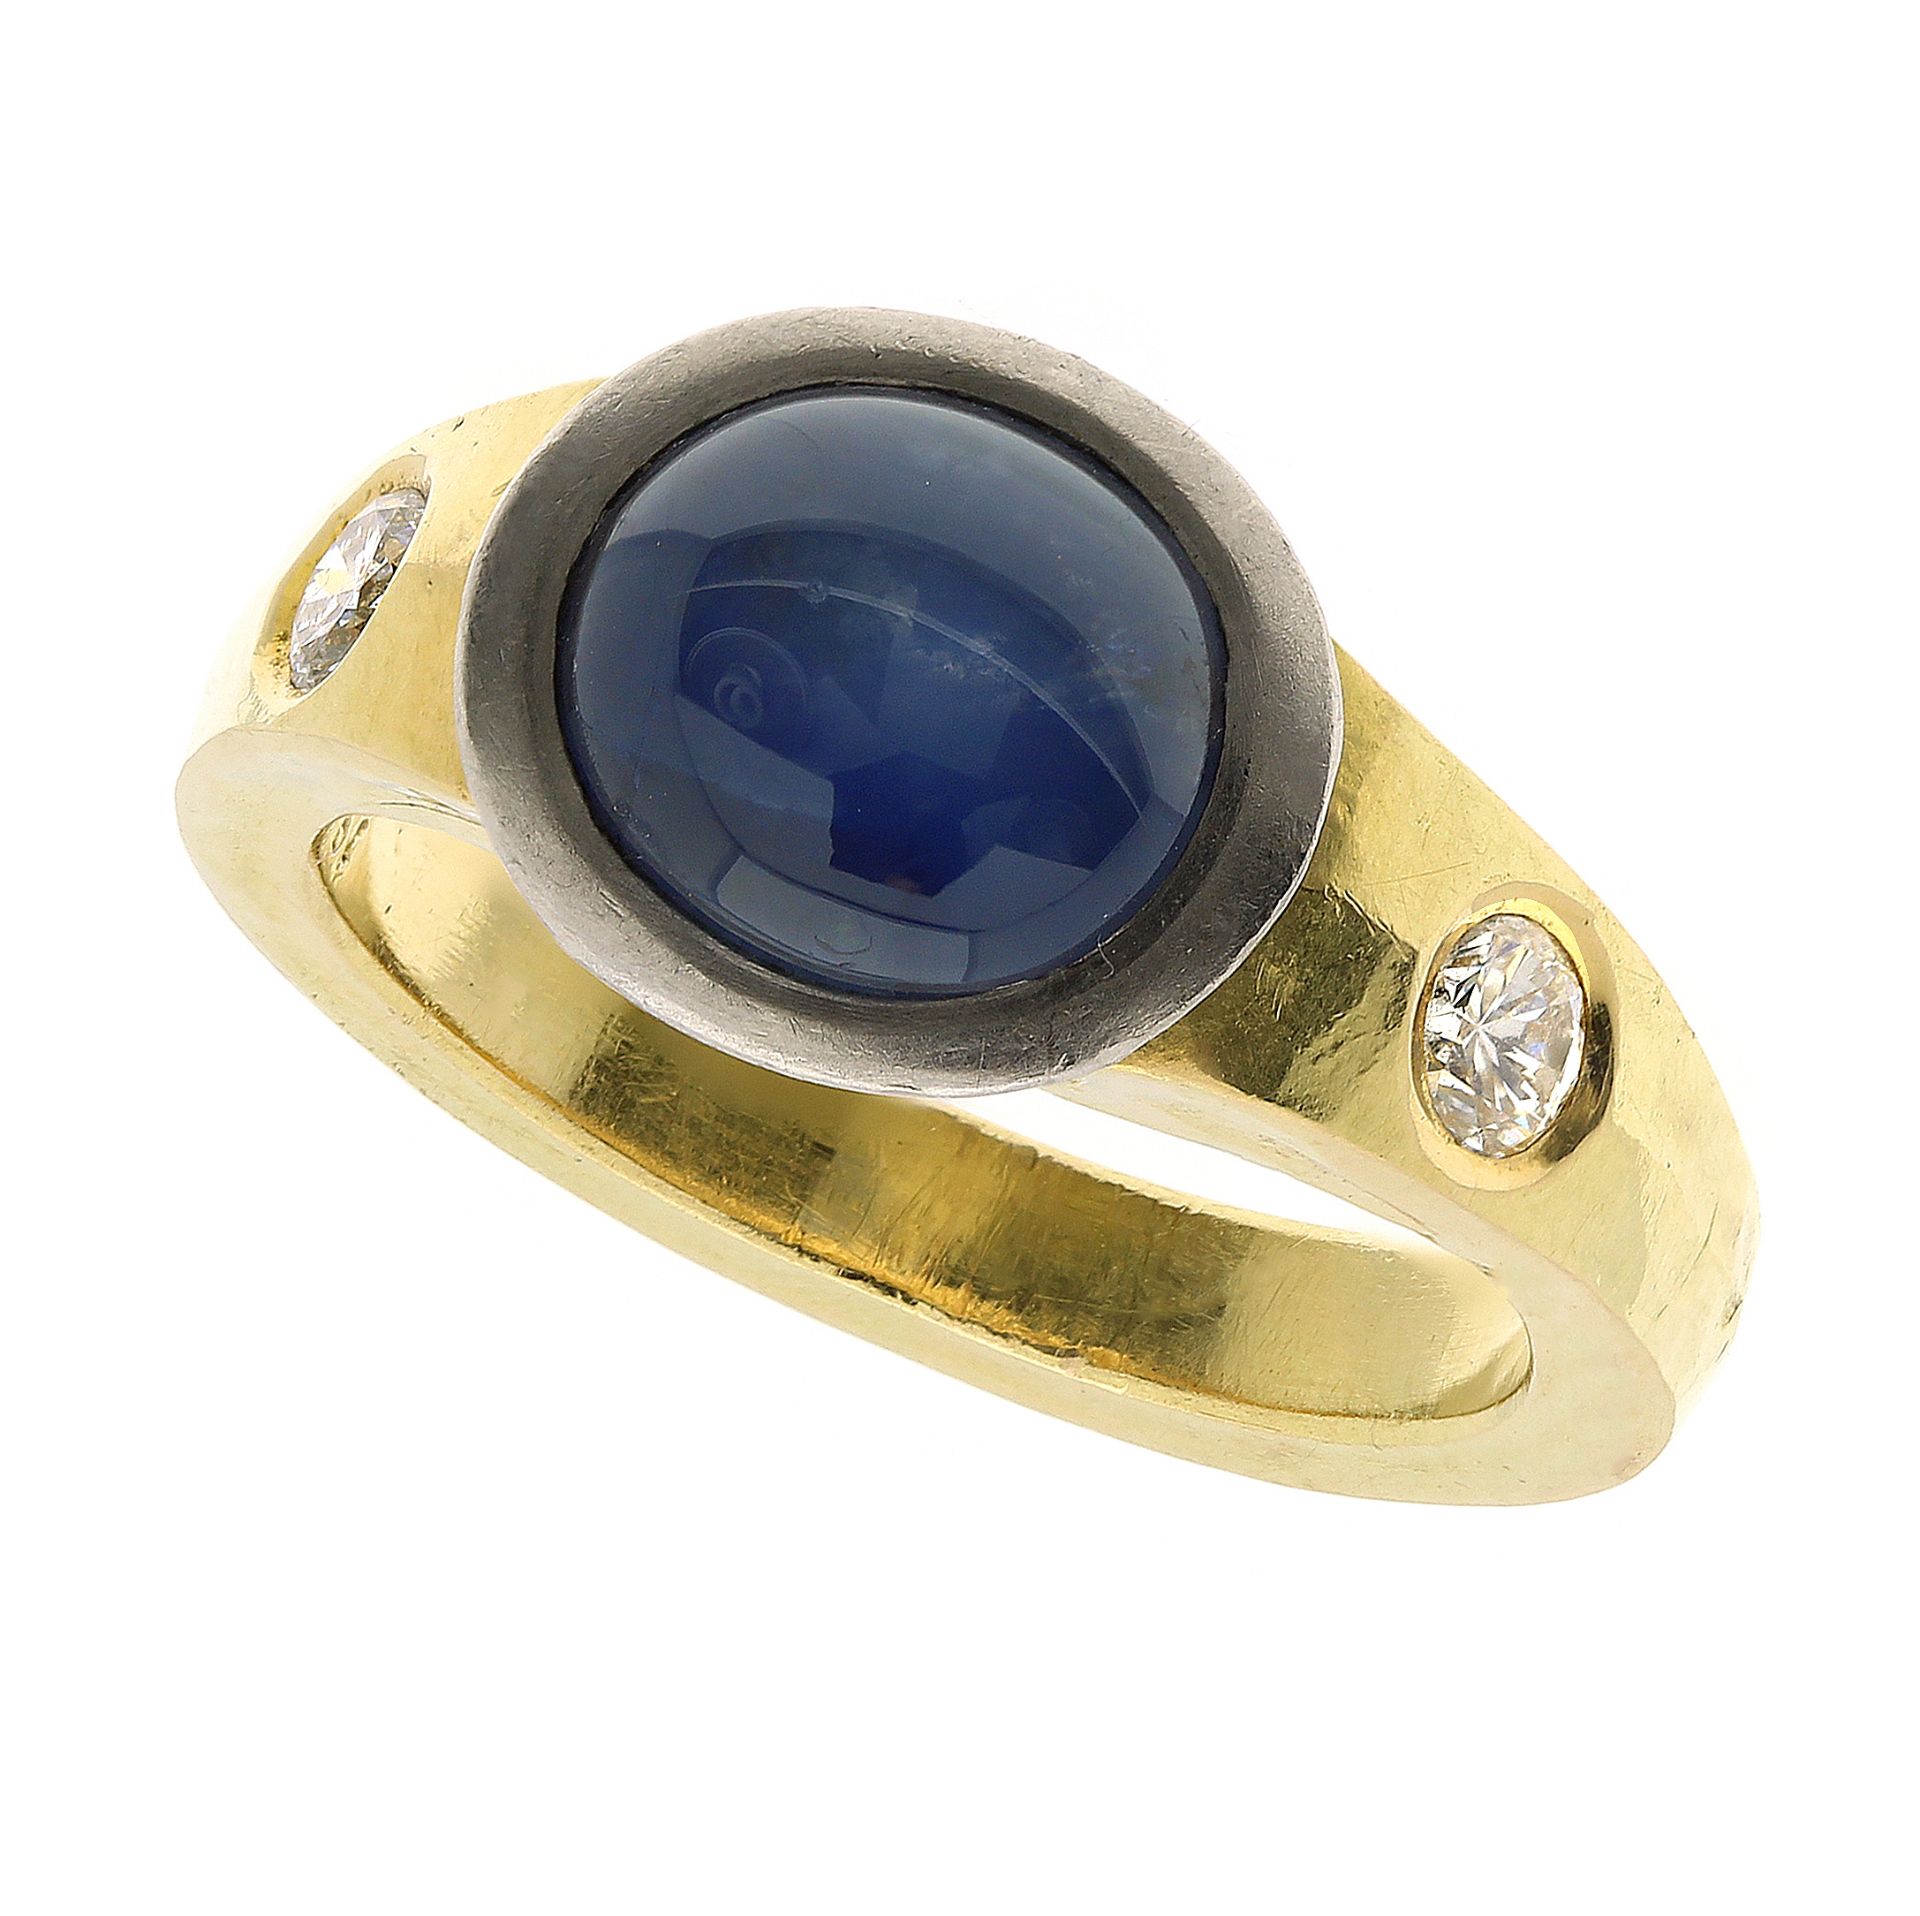 A STAR SAPPHIRE AND DIAMOND DRESS RING in 18ct yellow gold and platinum, set with a central oval